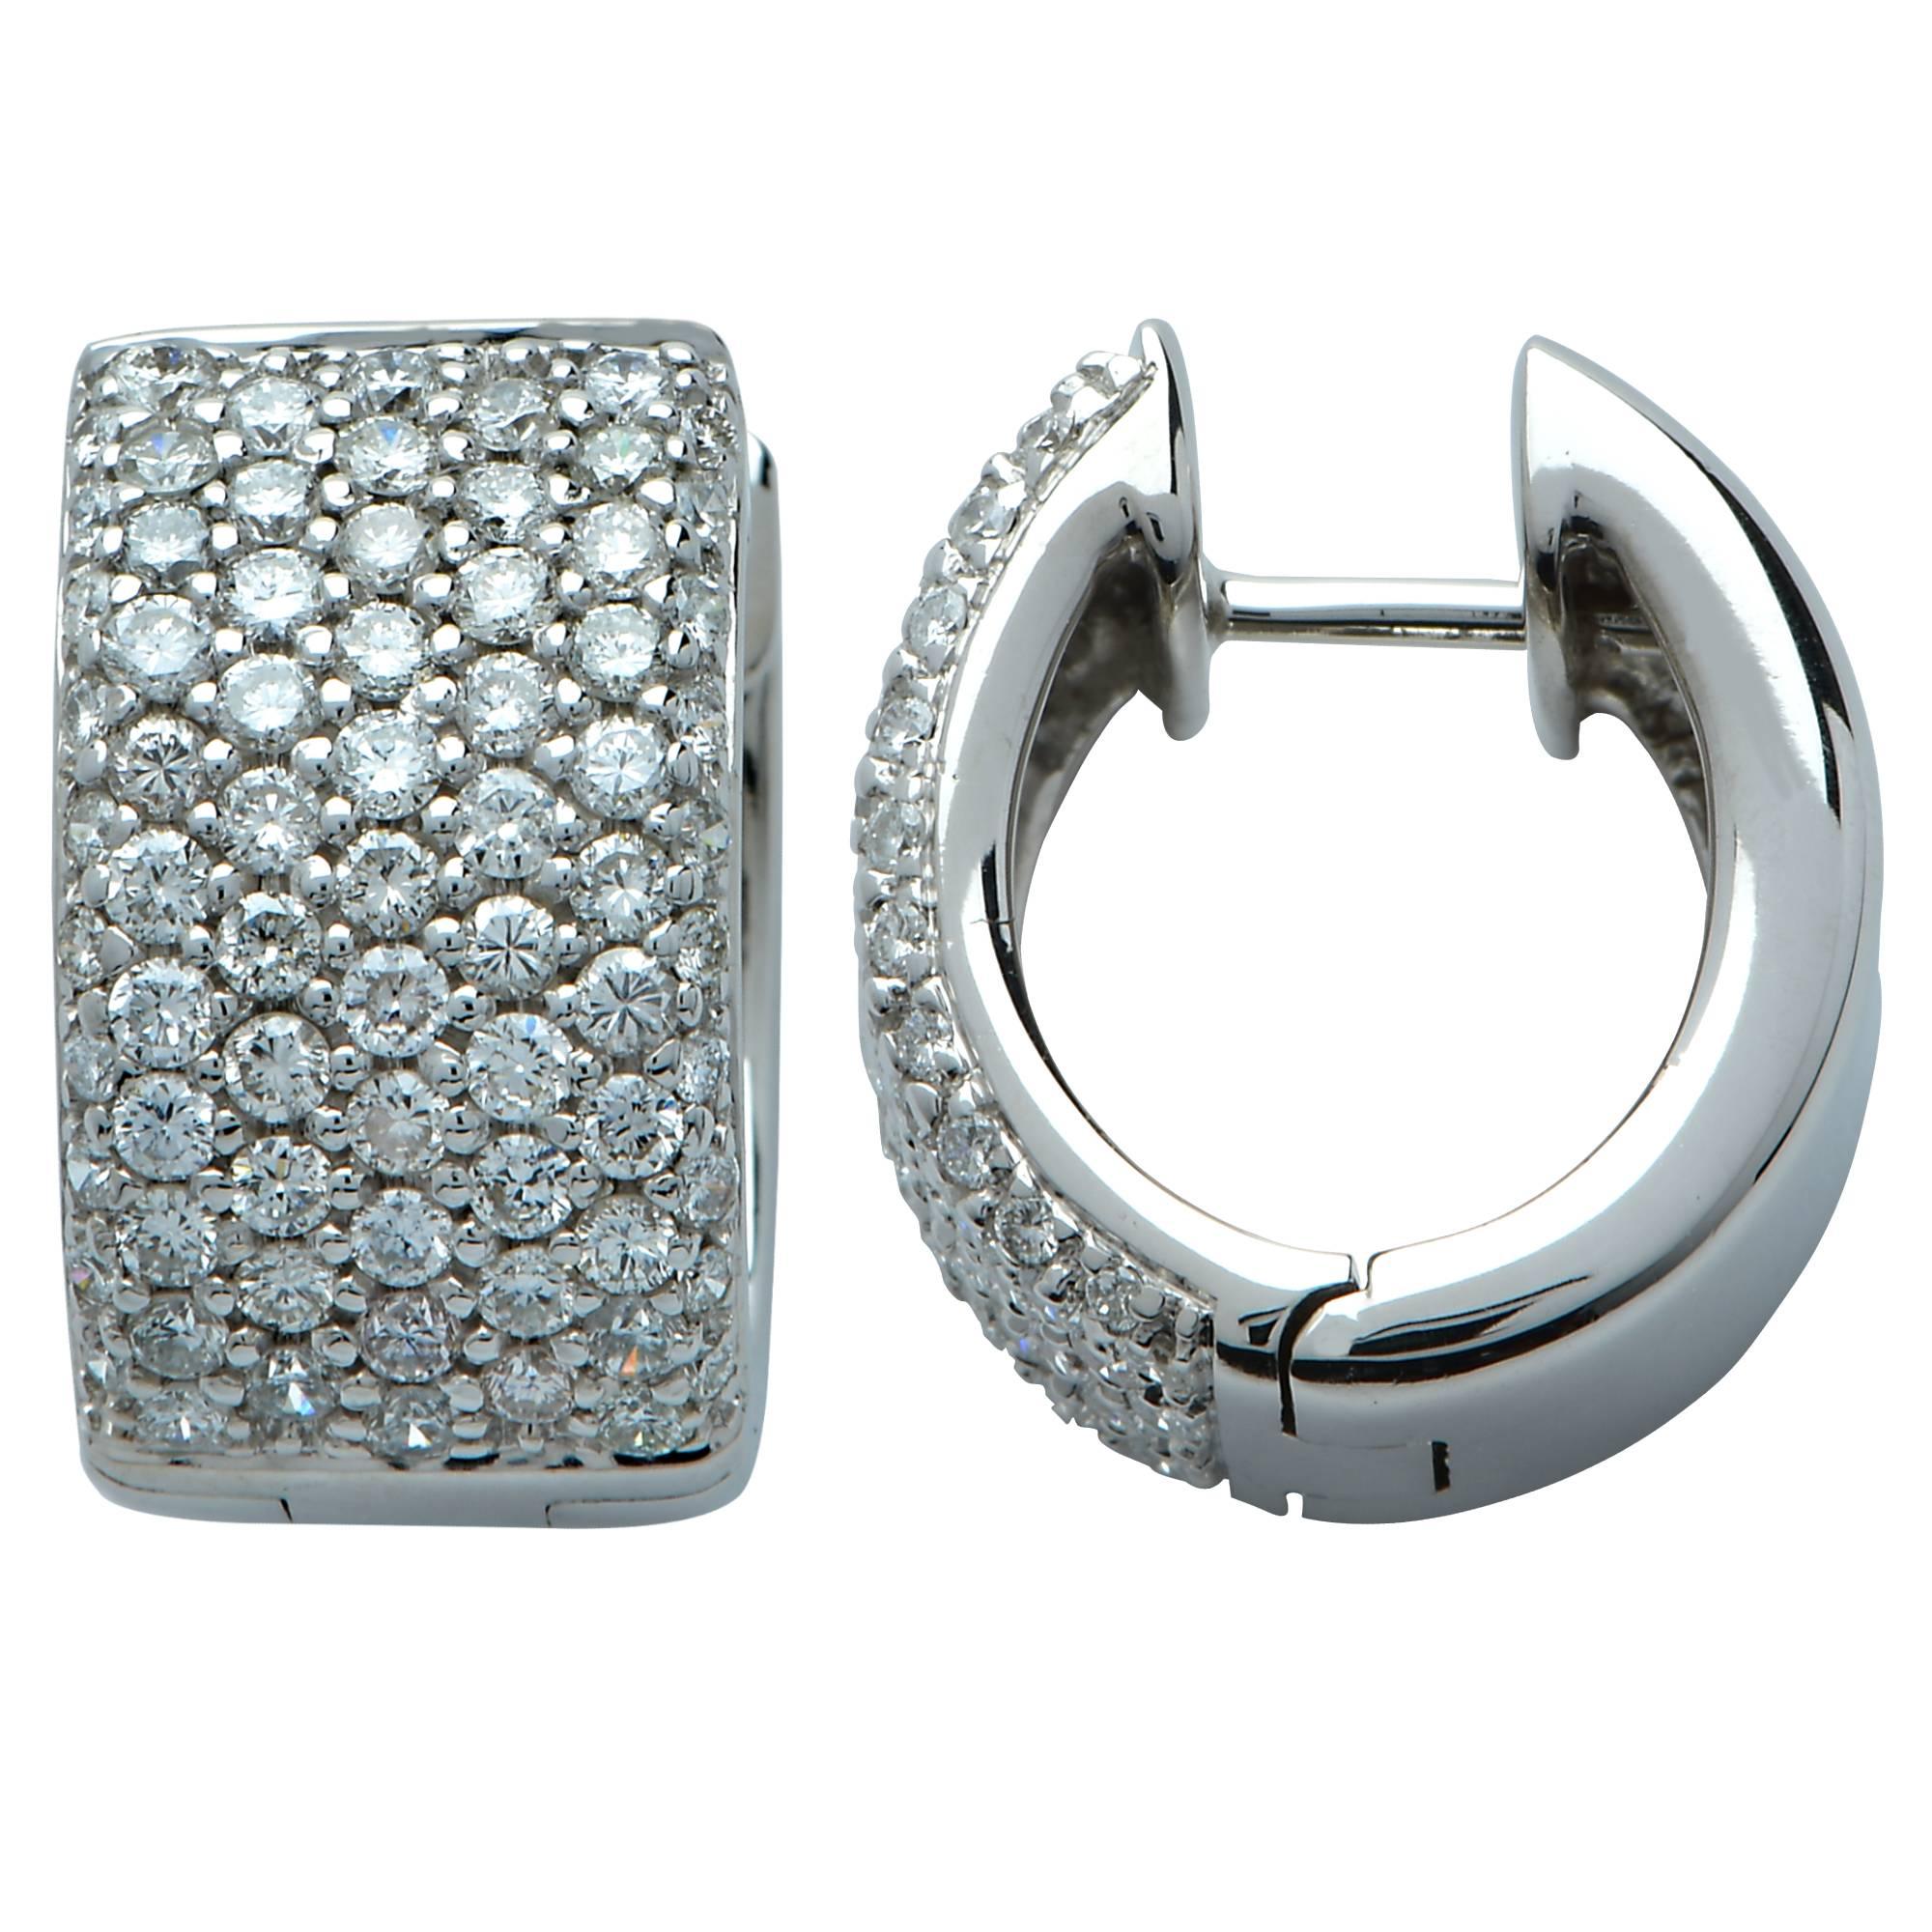 Spectacular 18K white gold earrings showcasing a dazzling display of 146 round brilliant cut diamonds weighing approximately 2cts G color and VS-SI clarity. These gorgeous huggie earrings lay close to the ear and are not only stunning, but wearable